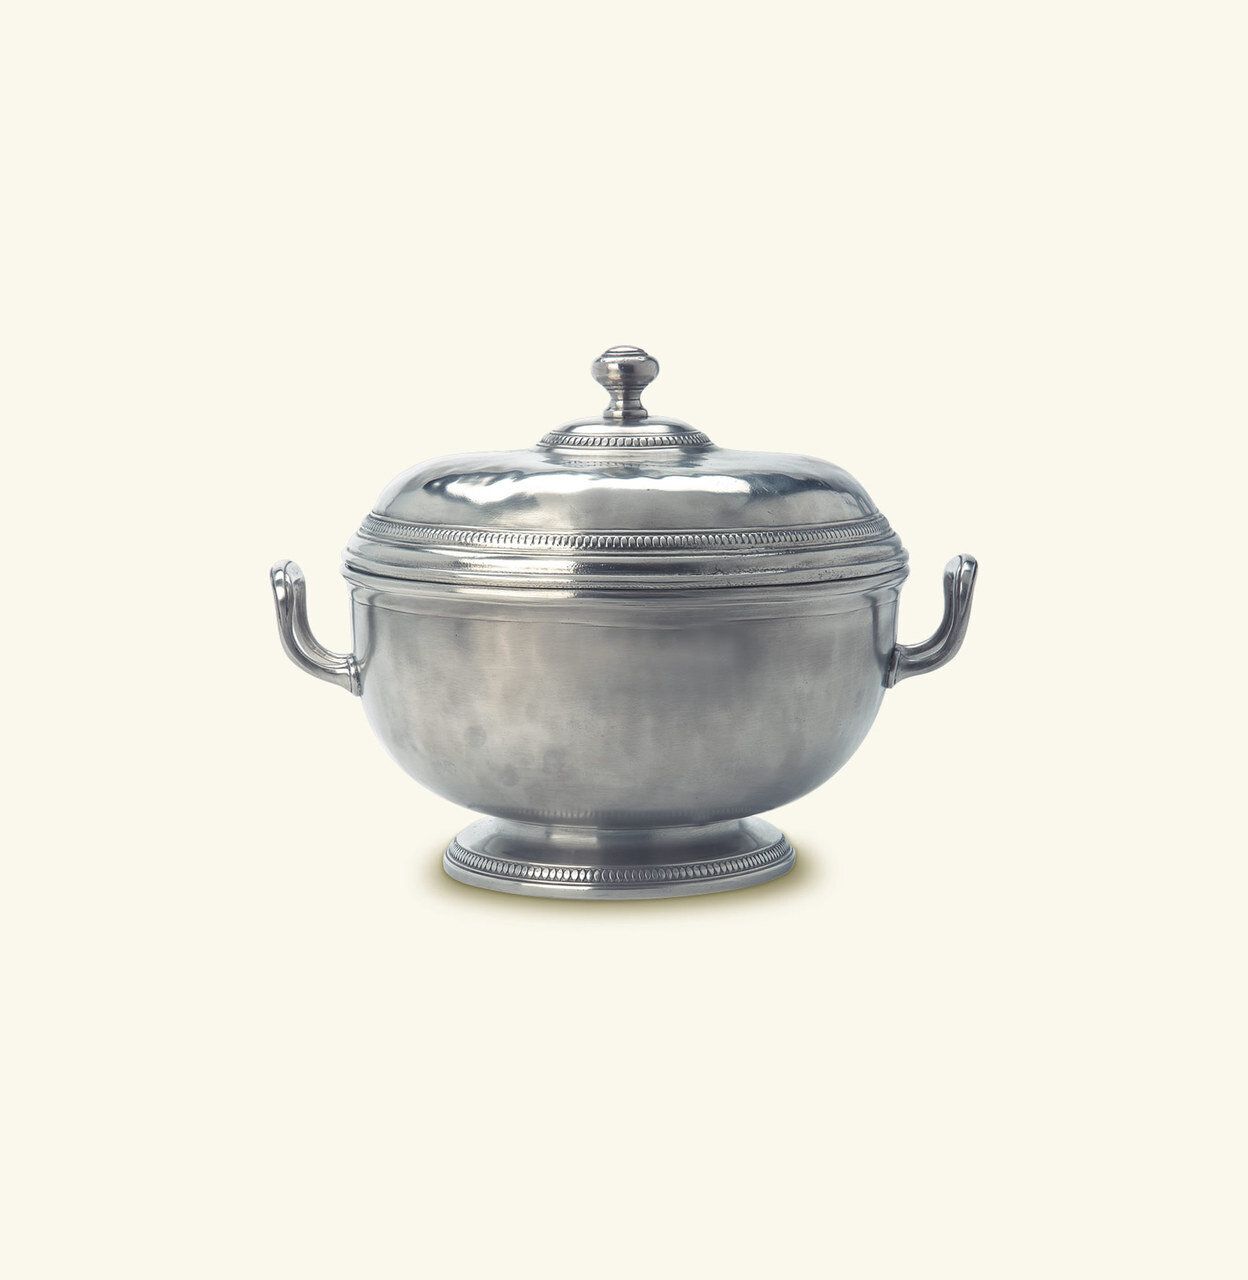 Match Pewter Beaded Round Tureen a529.0